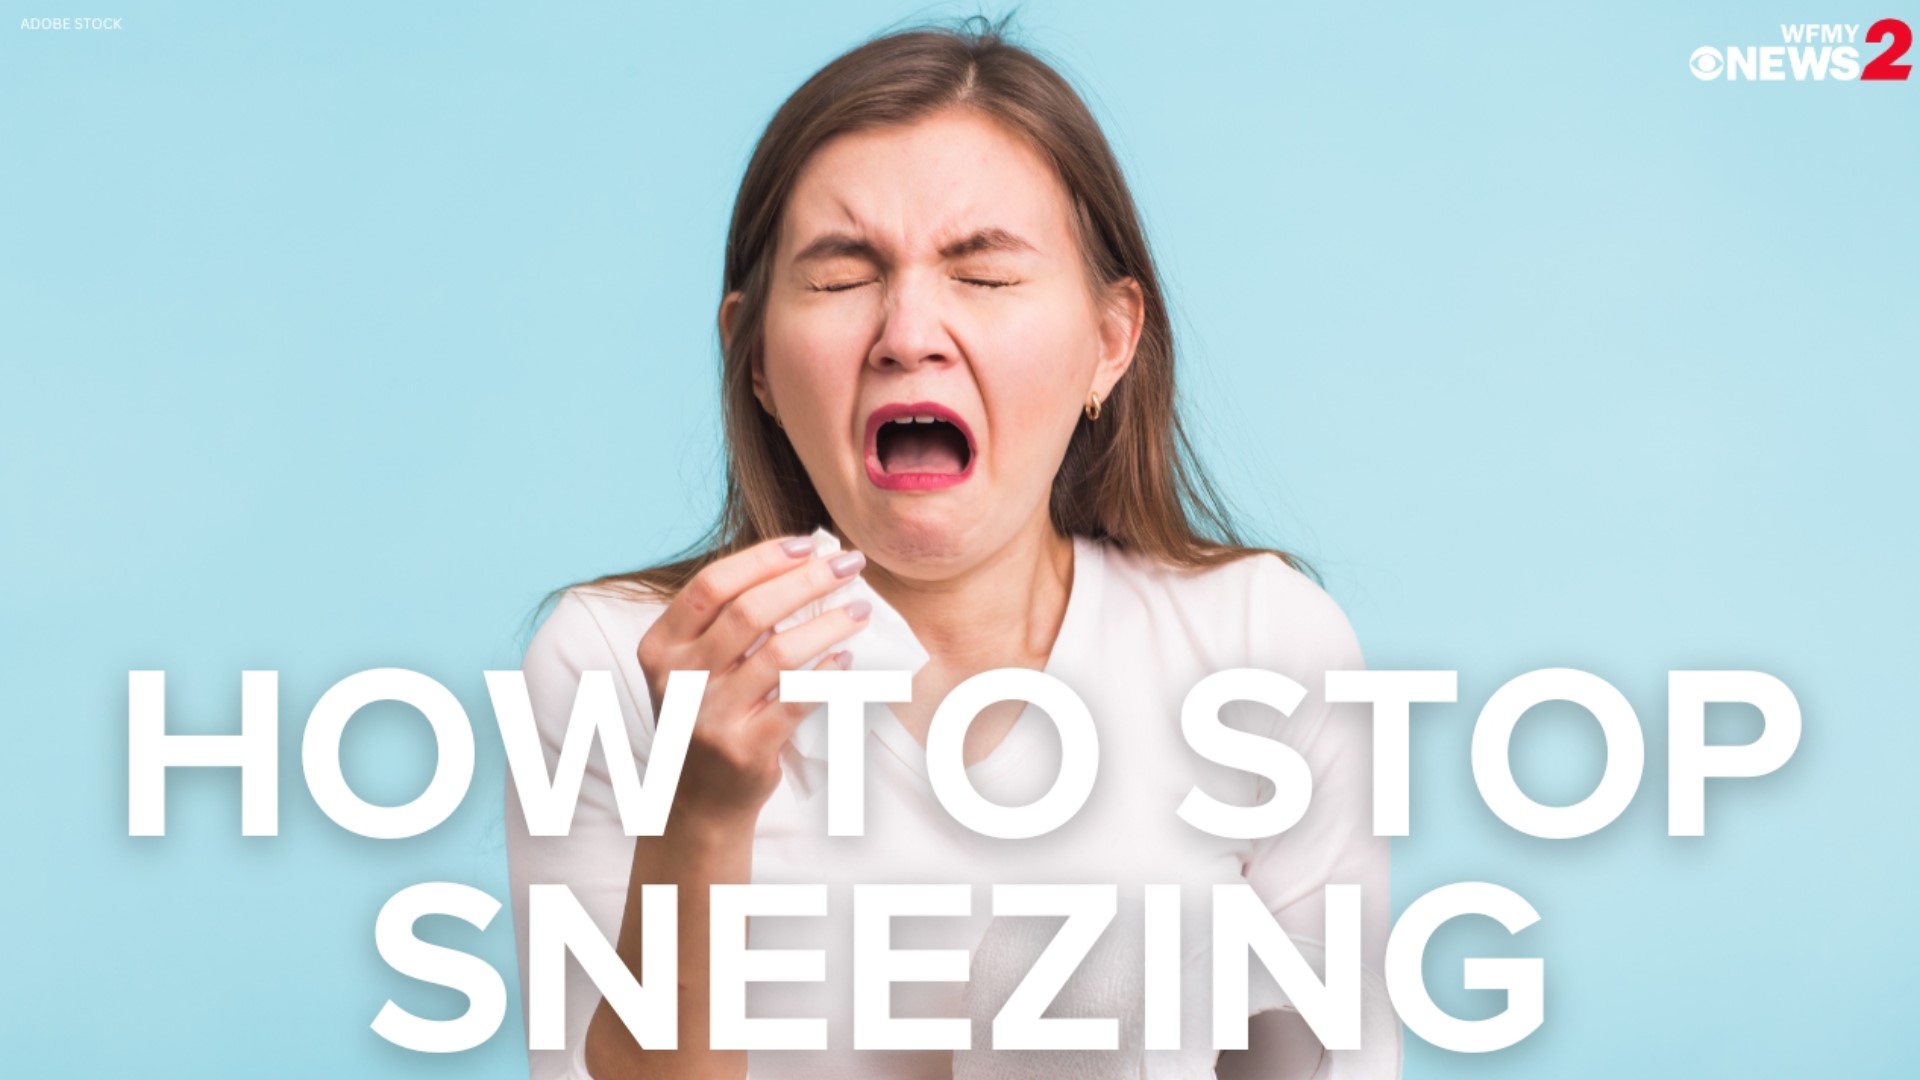 Pollen has arrived in the Triad, leaving many who have allergies looking for relief. There are ways to stop the sneezing.